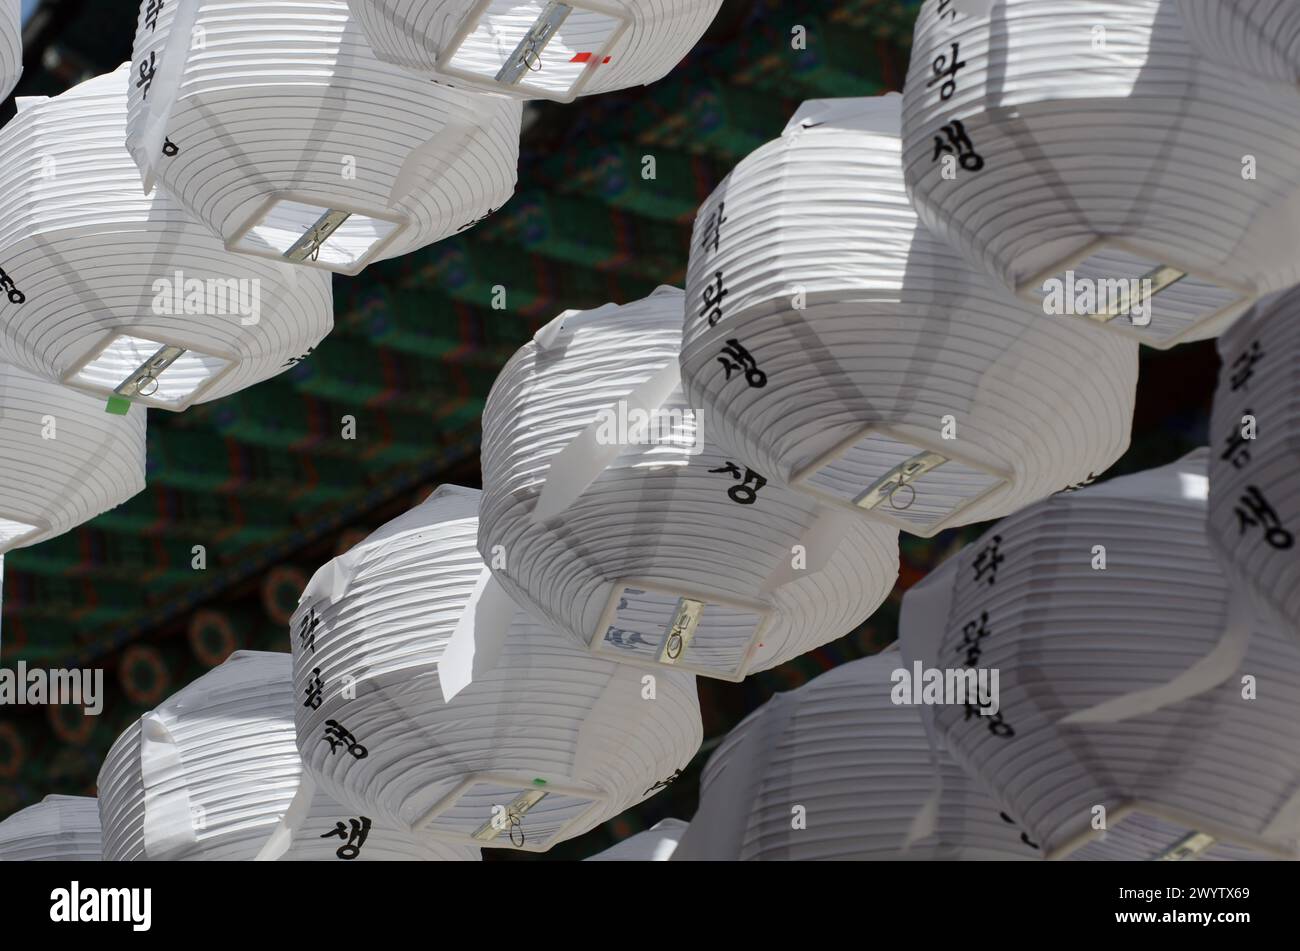 A row of lanterns with Chinese writing on them. The lanterns are white and are hanging from a building Stock Photo